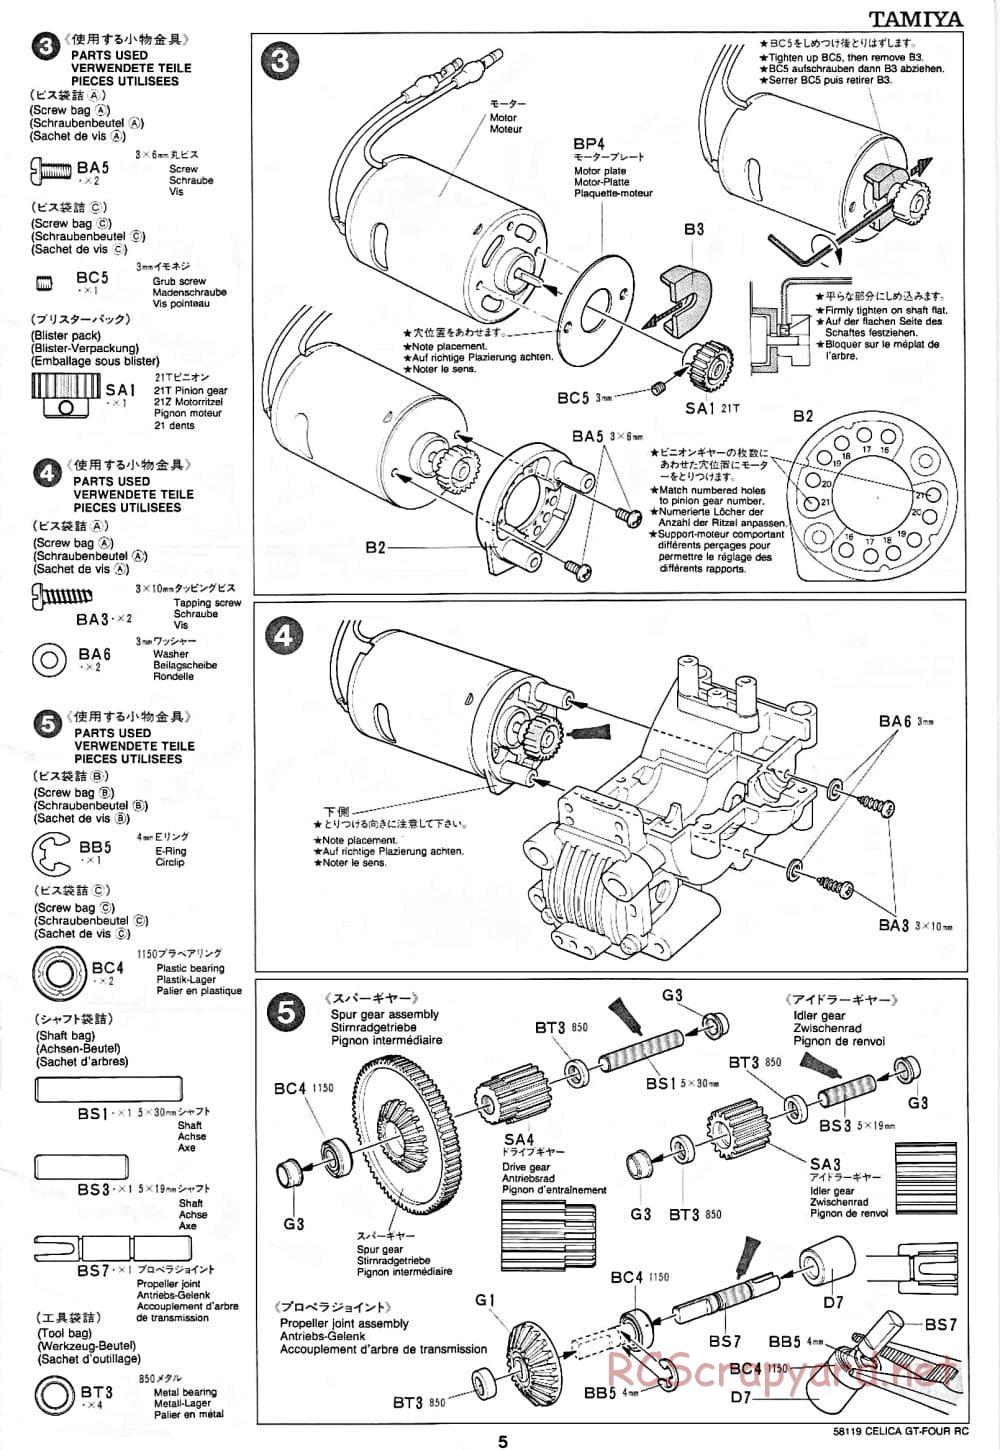 Tamiya - Toyota Celica GT-Four RC - TA-01 Chassis - Manual - Page 5